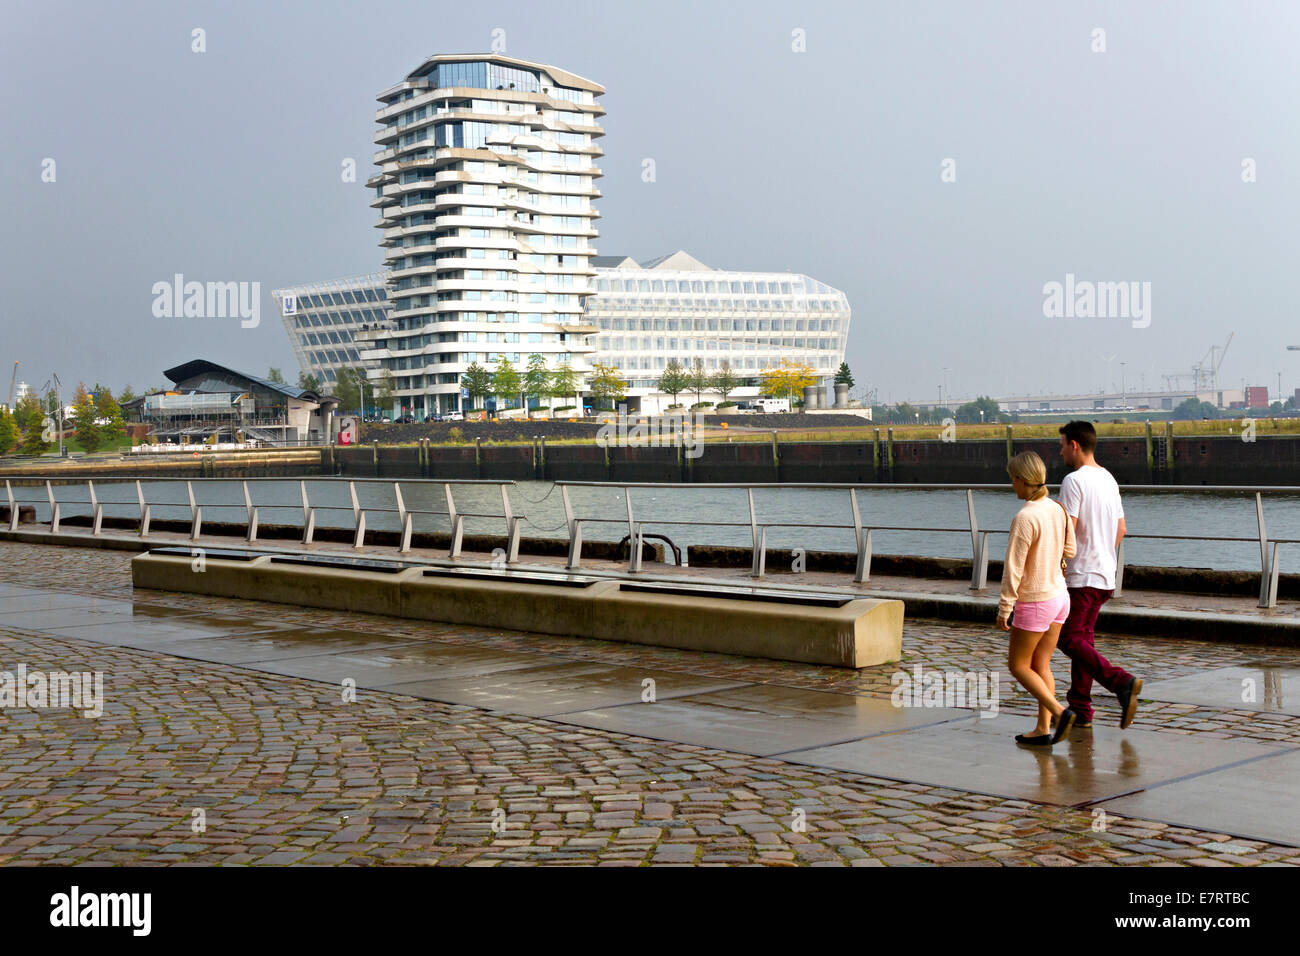 Marco Polo Tower Harbour City Hafen City Hamburg Germany Europe